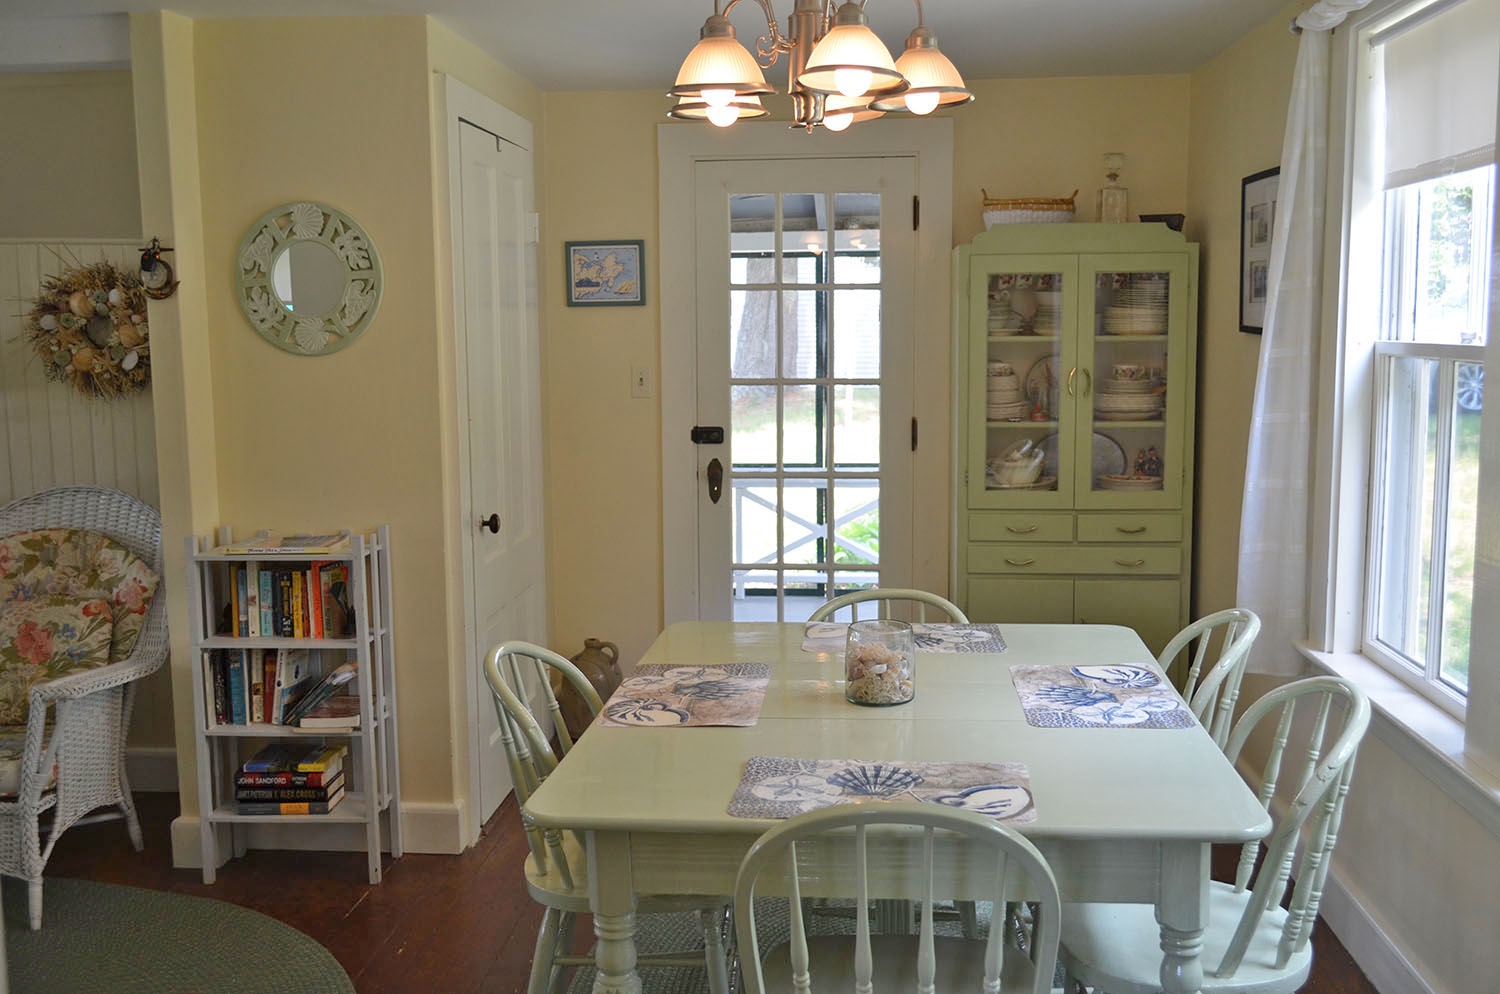 There is access to the screened porch from the dining room.